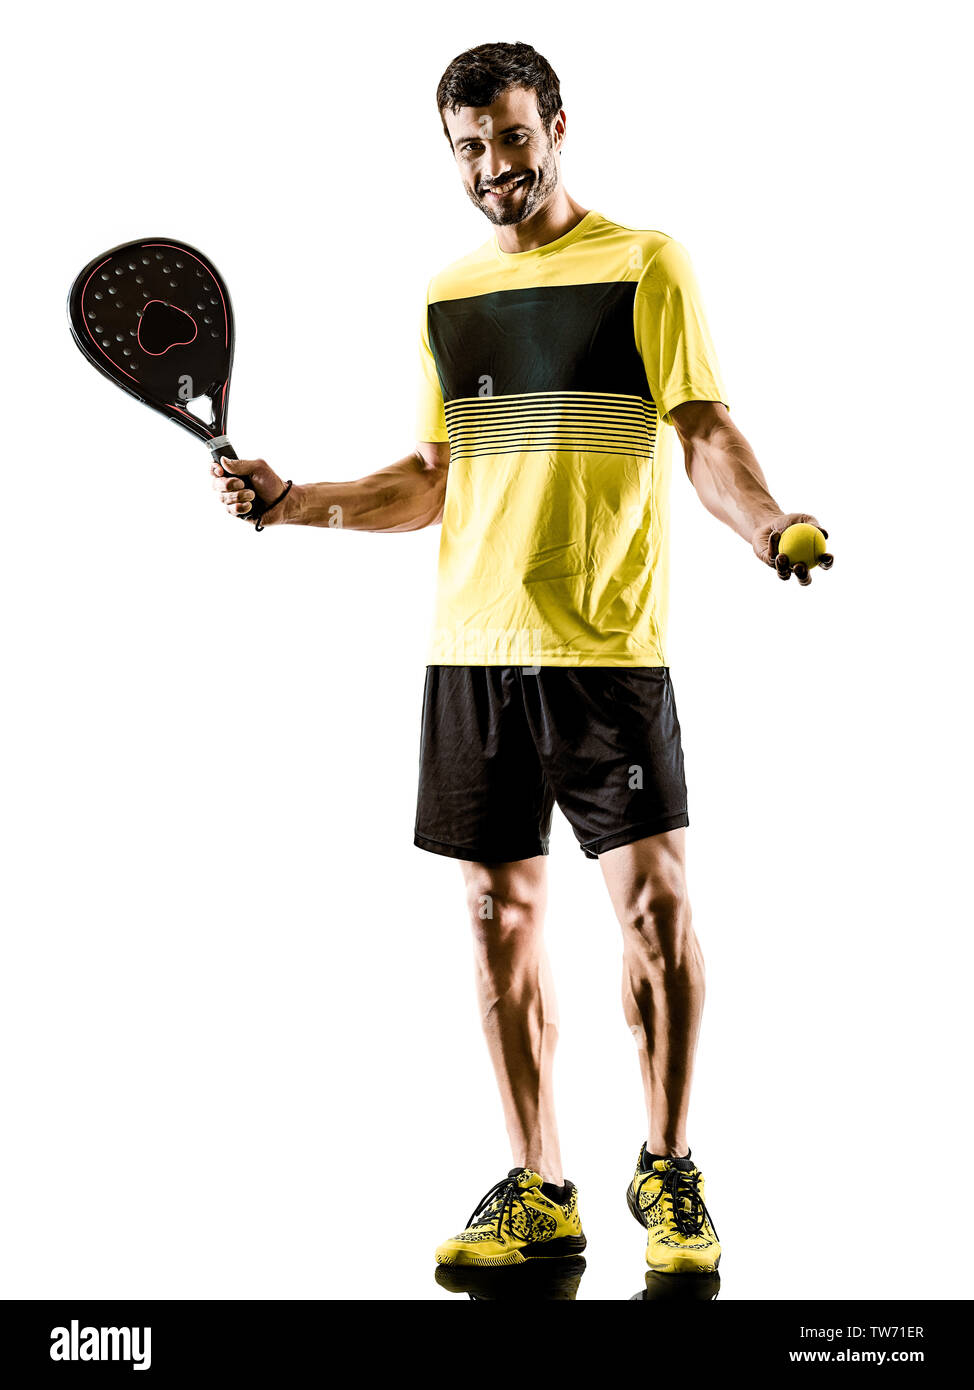 one caucasian man playing Paddle tennis player isolated on white background Stock Photo